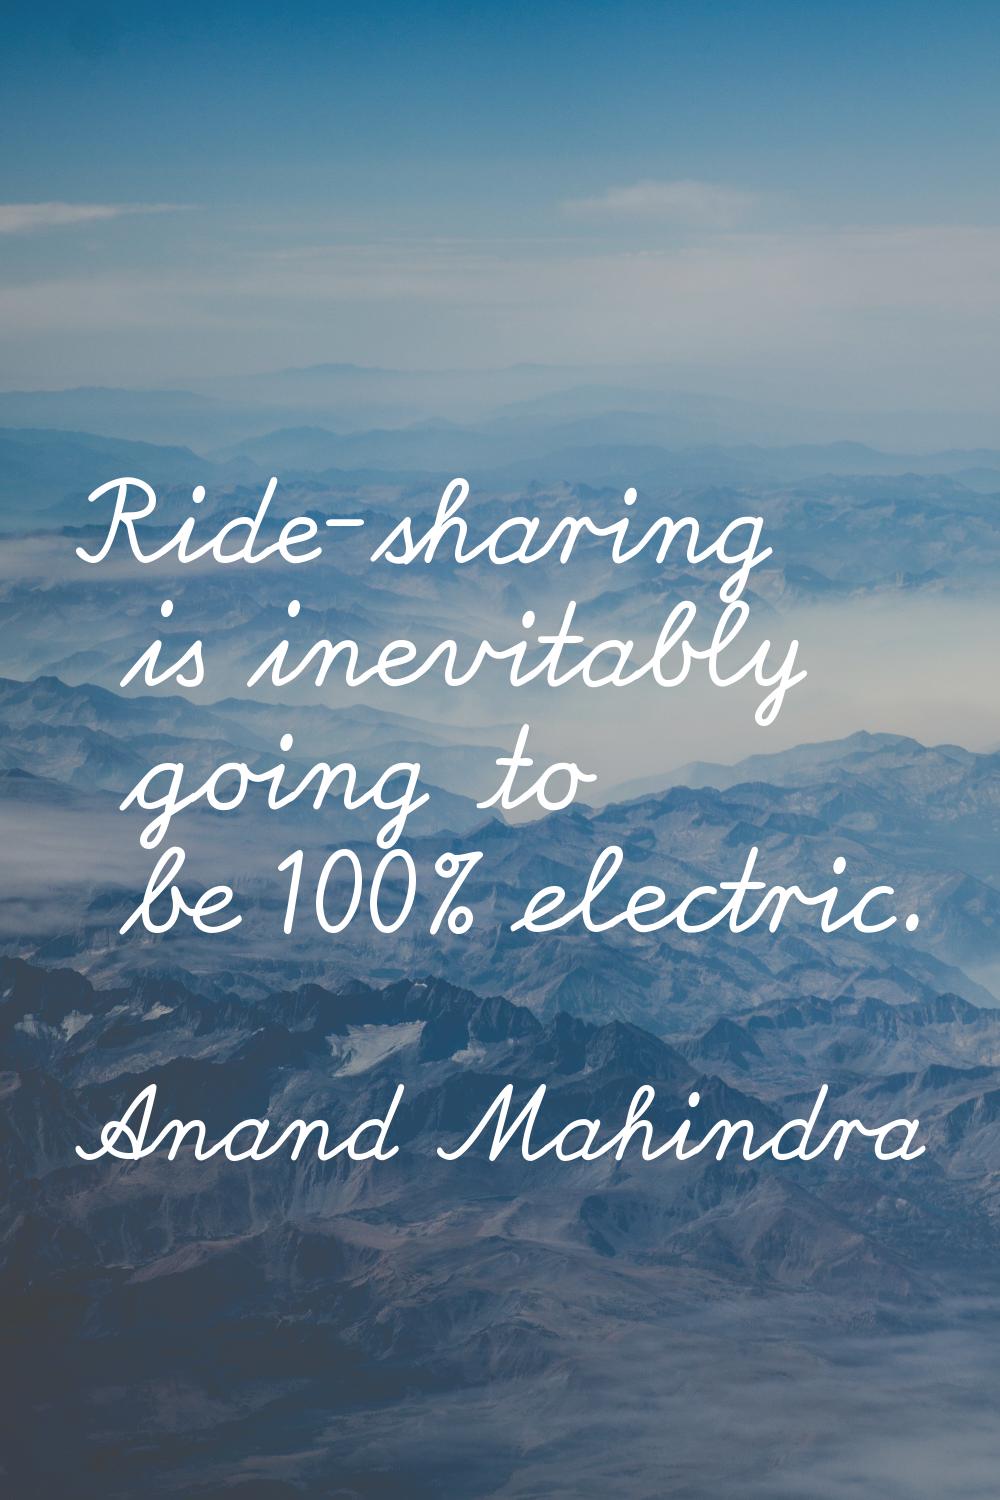 Ride-sharing is inevitably going to be 100% electric.